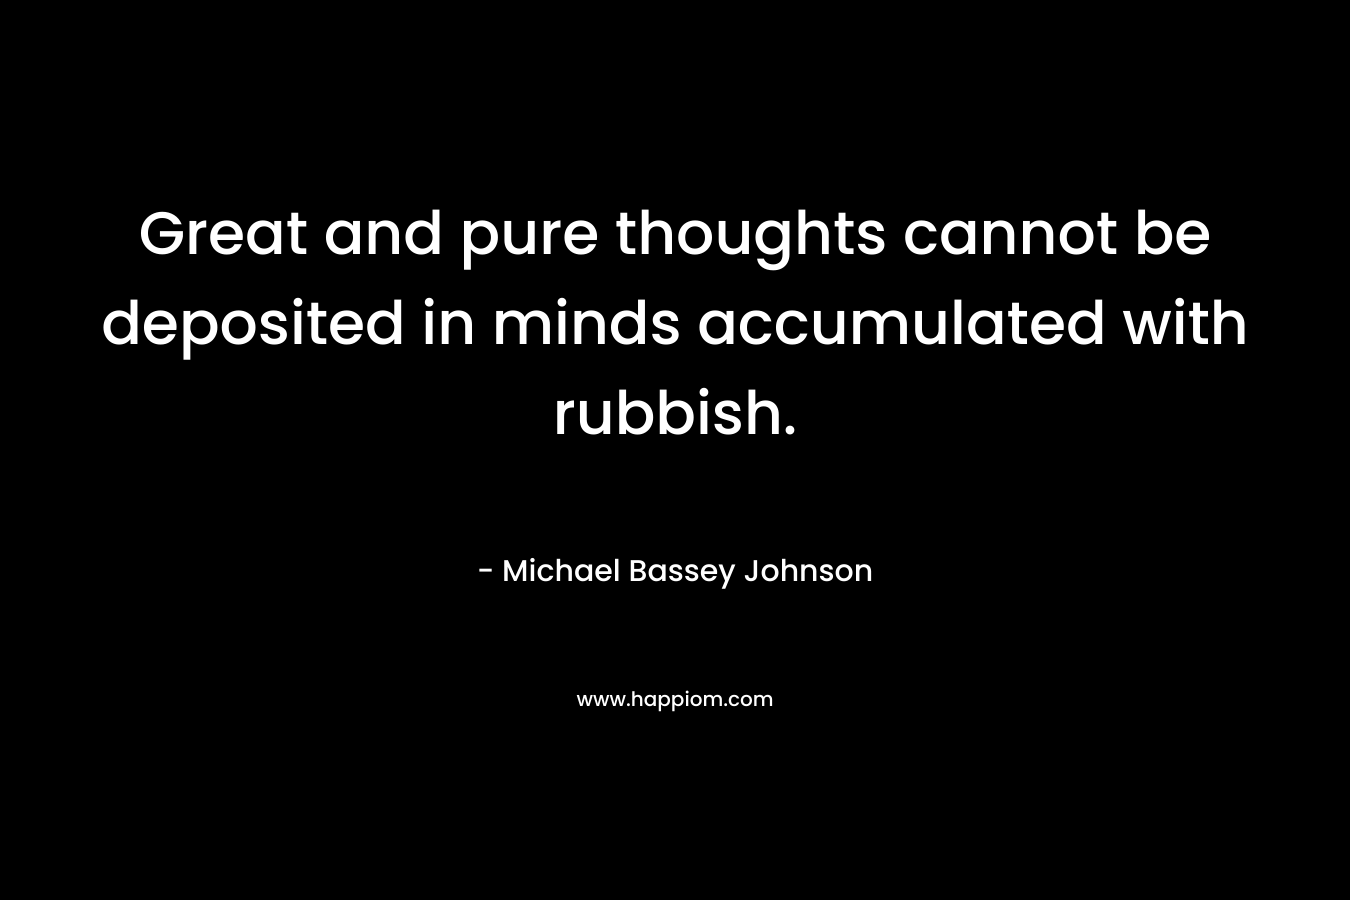 Great and pure thoughts cannot be deposited in minds accumulated with rubbish. – Michael Bassey Johnson